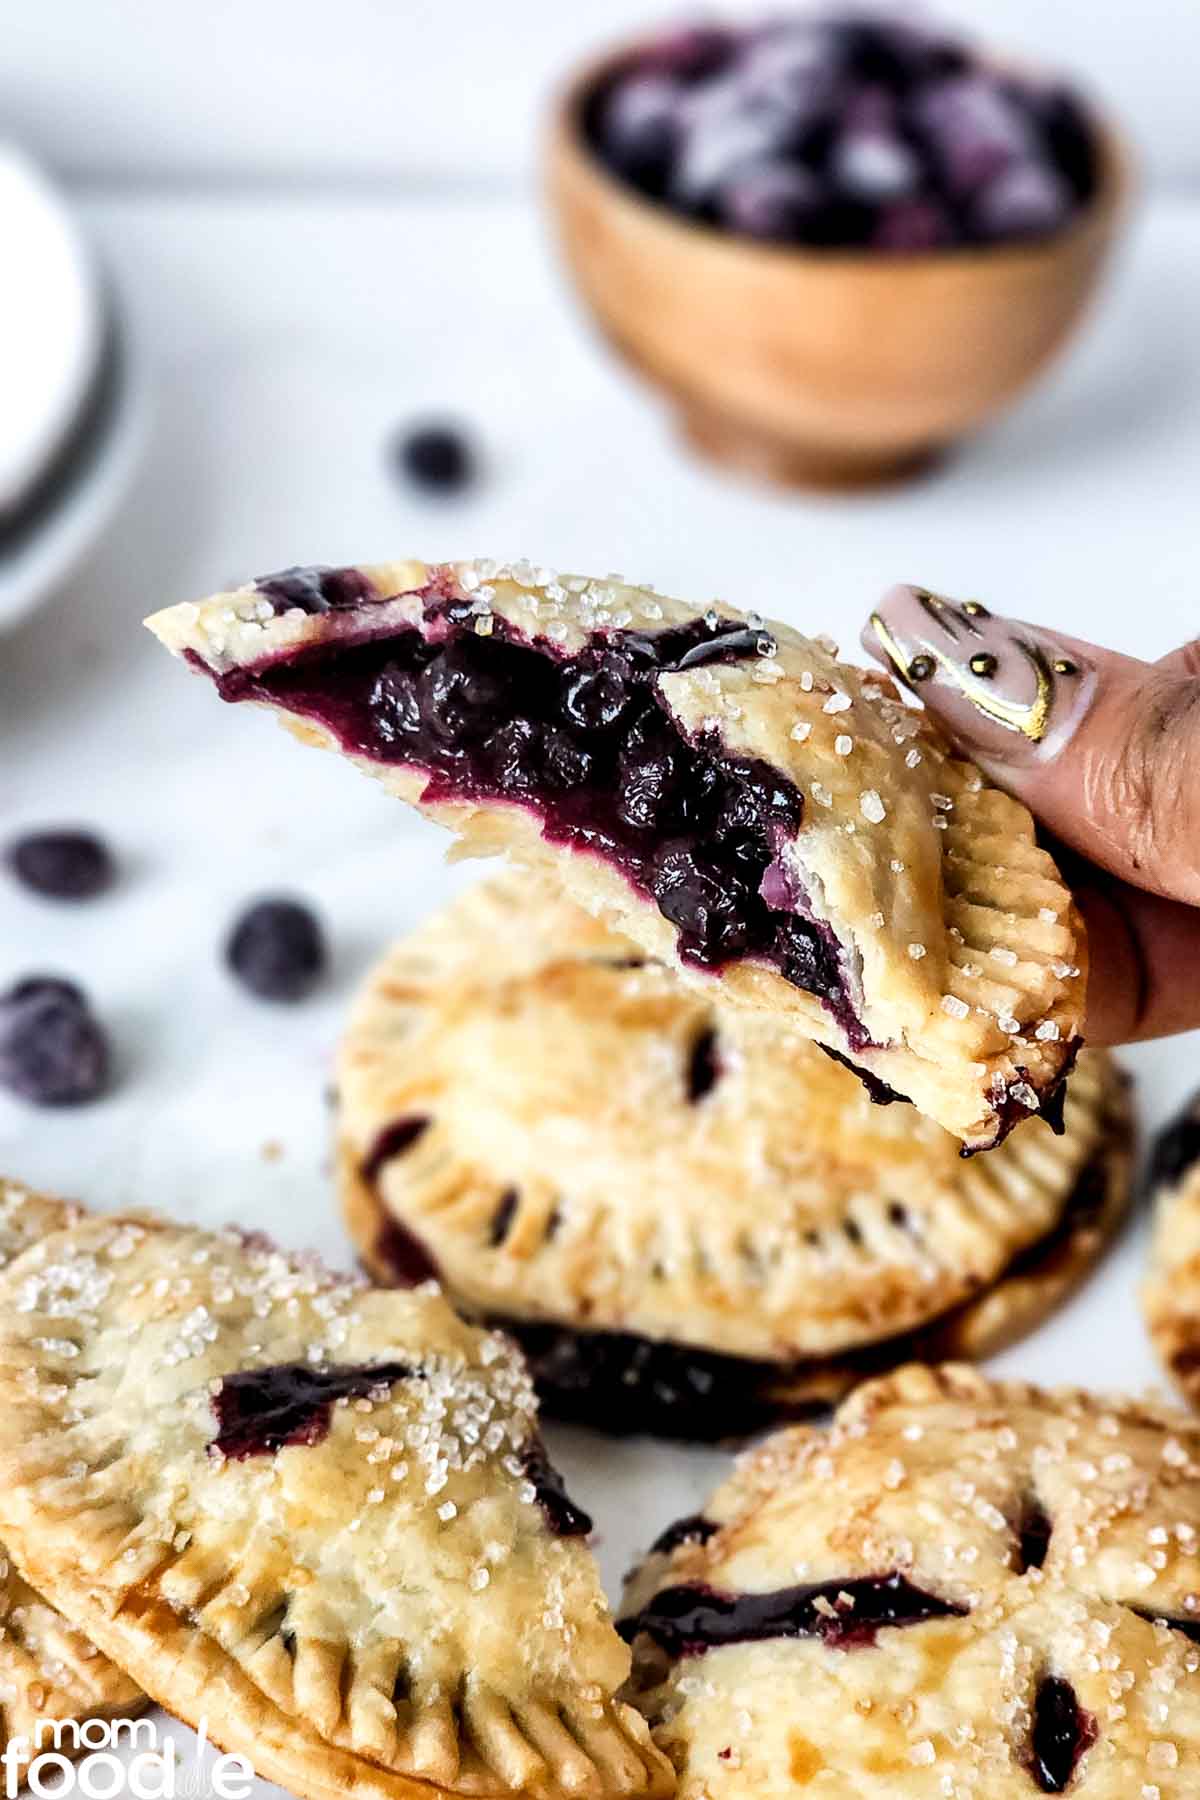 half a blueberry hand pie showing the blueberry filling.